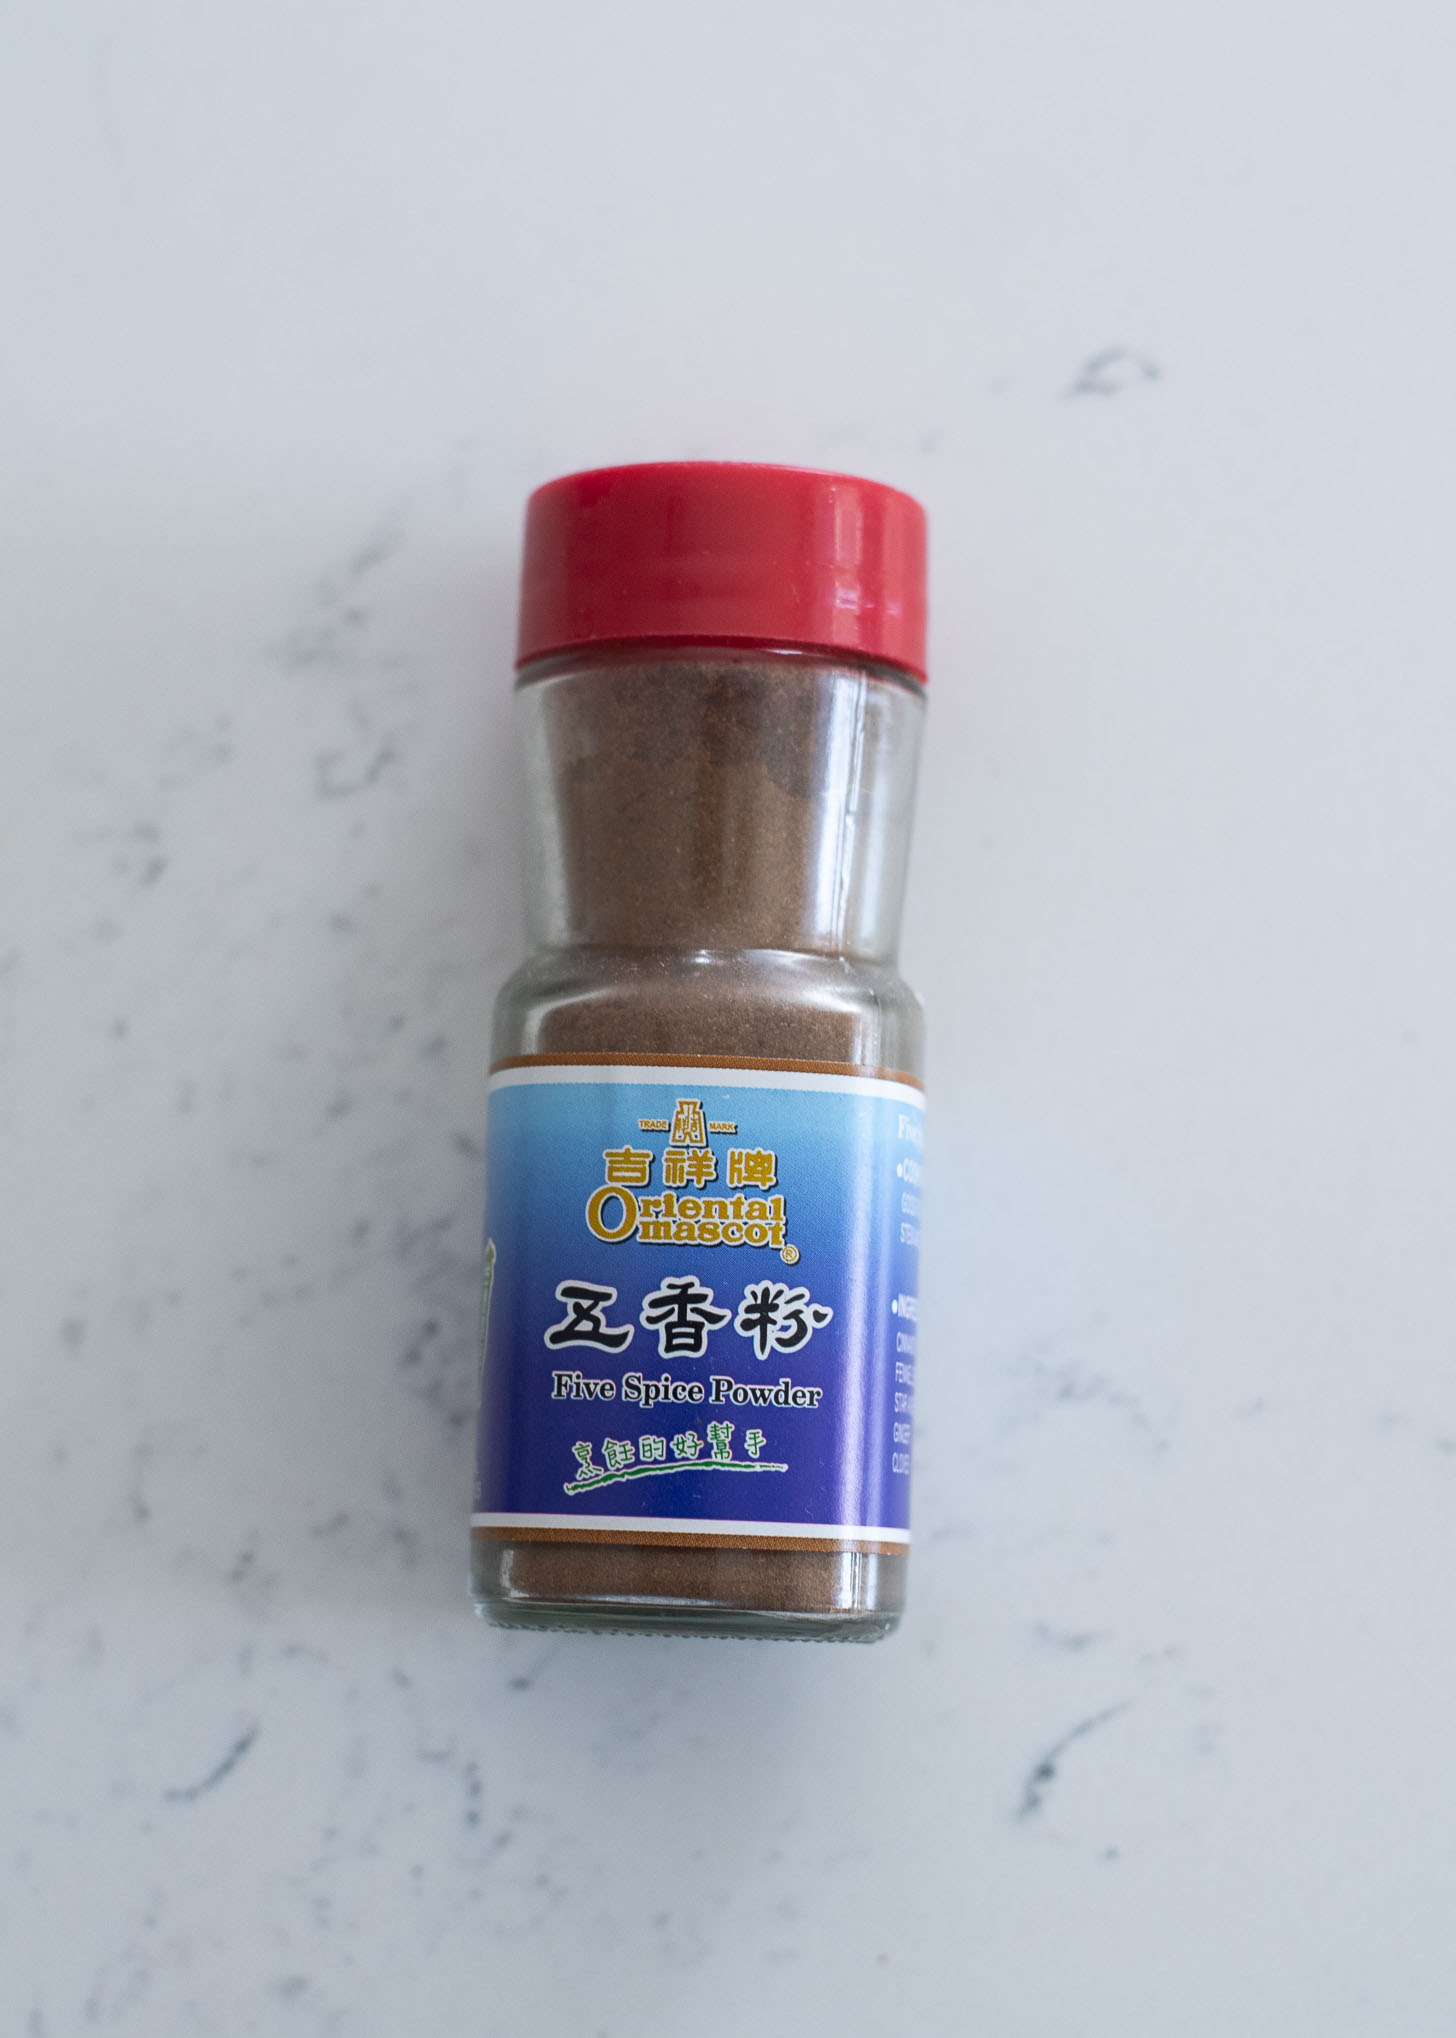 Five spice powder is used to make Taiwanese popcorn chicken.